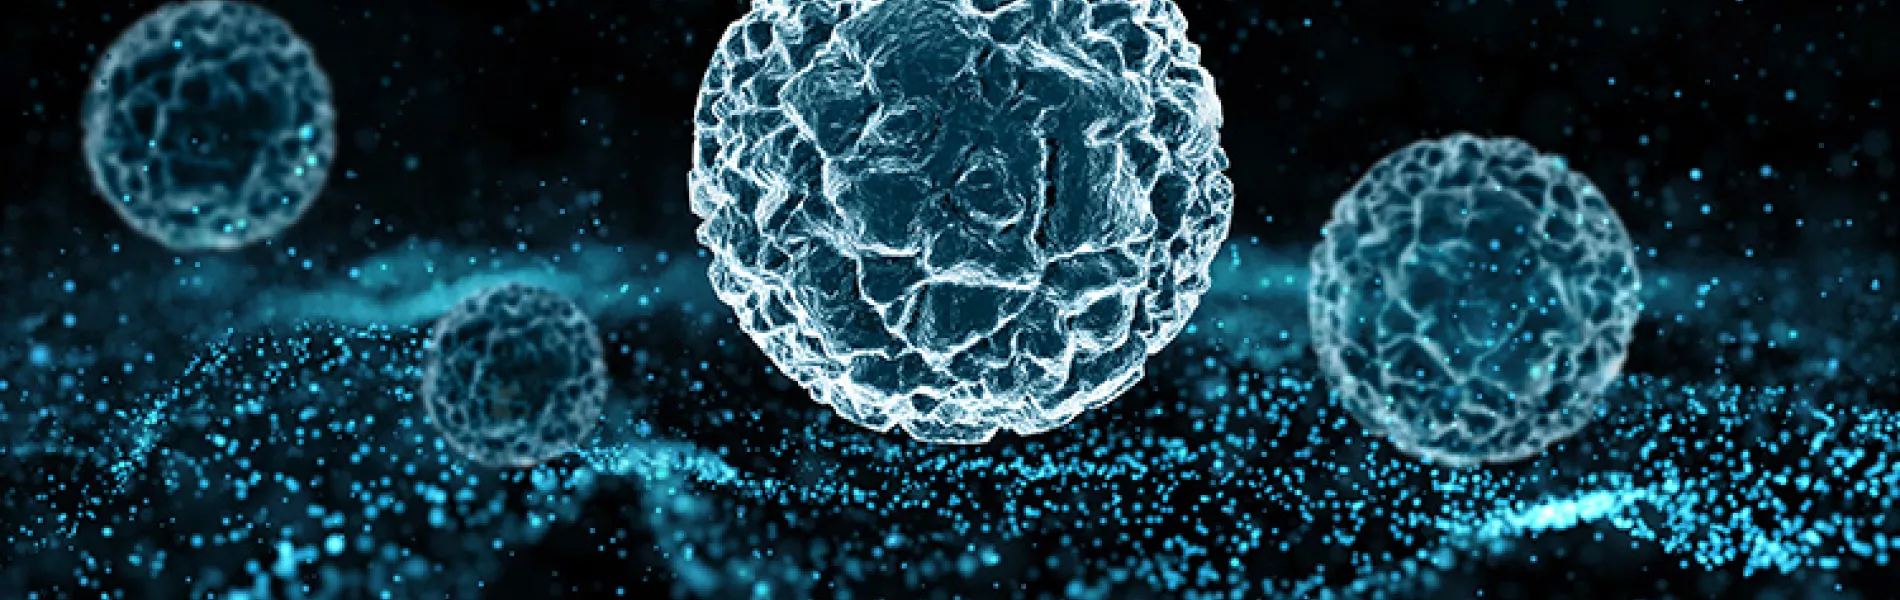 particles-virus-cells-floating-Image by kjpargeter